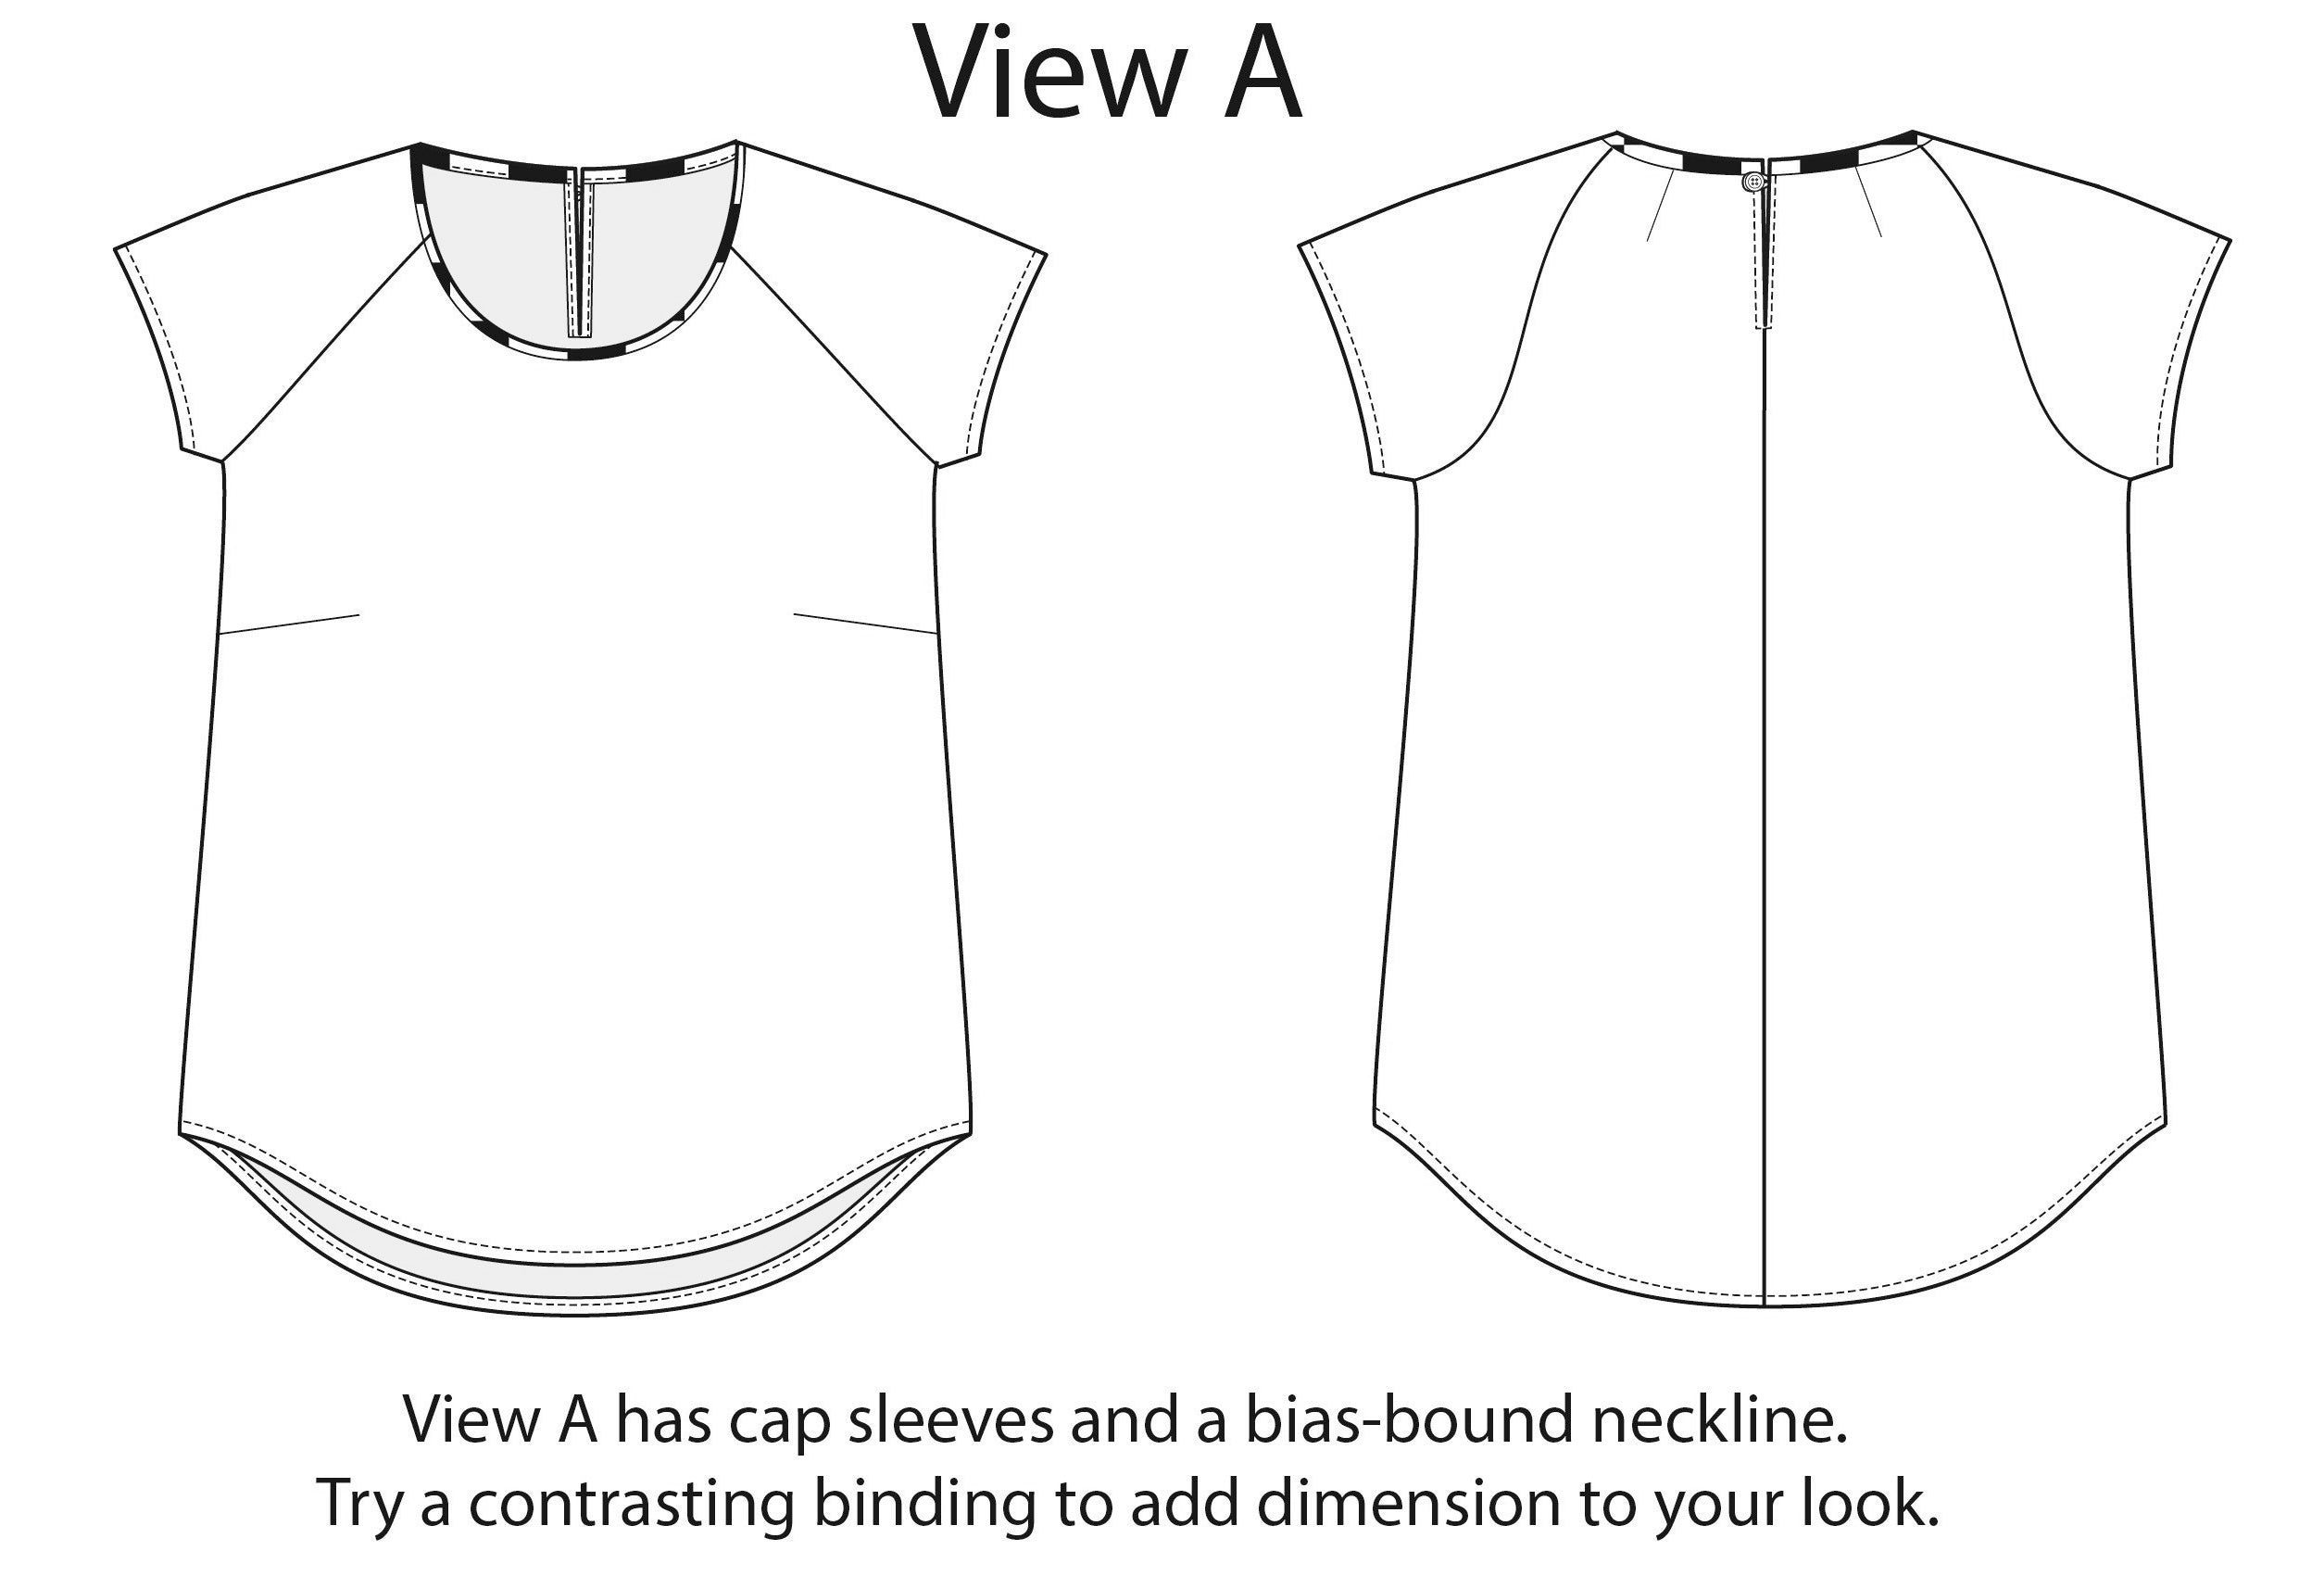 Line drawings of a raglan-sleeved top with bust and back-shoulder darts, cap sleeves and a contrasting bound neckline.